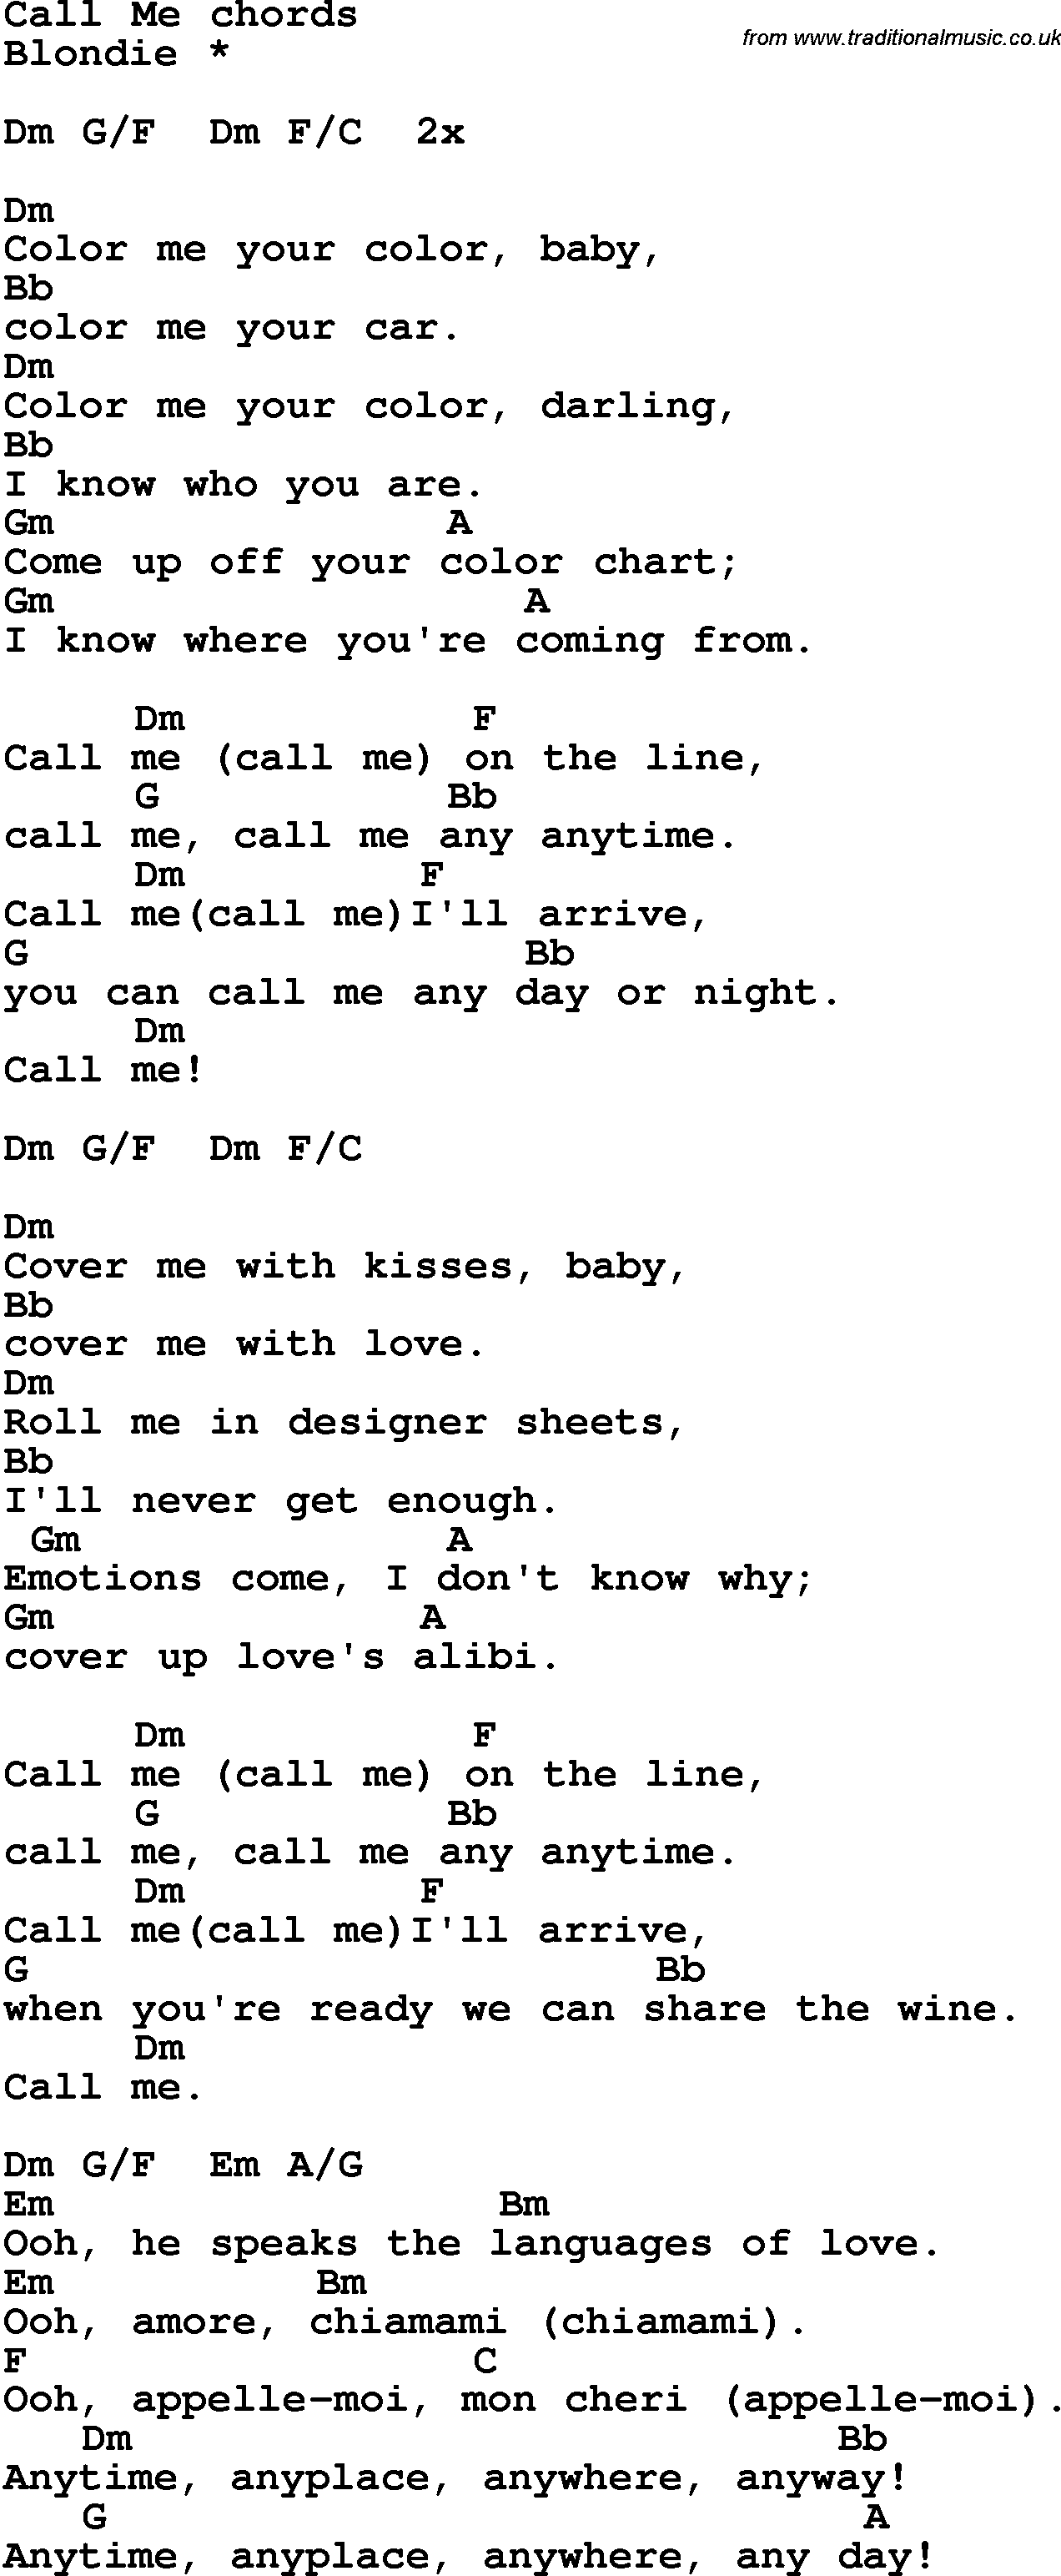 Song Lyrics with guitar chords for Call Me